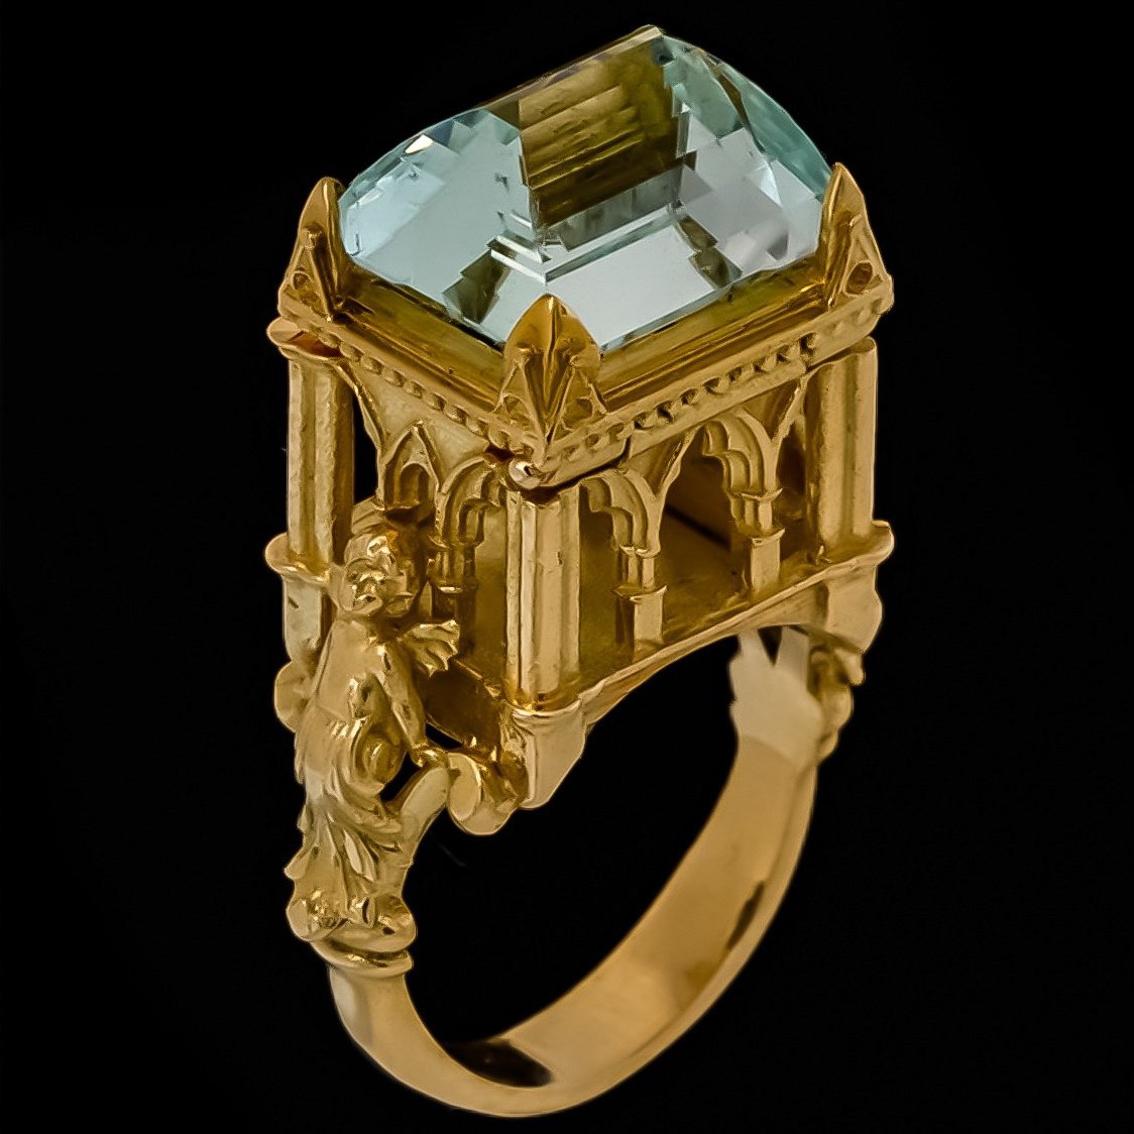 Galerie des Glaces Cathedral Poison Ring in 18 Karat Yellow Gold with Aquamarine 6